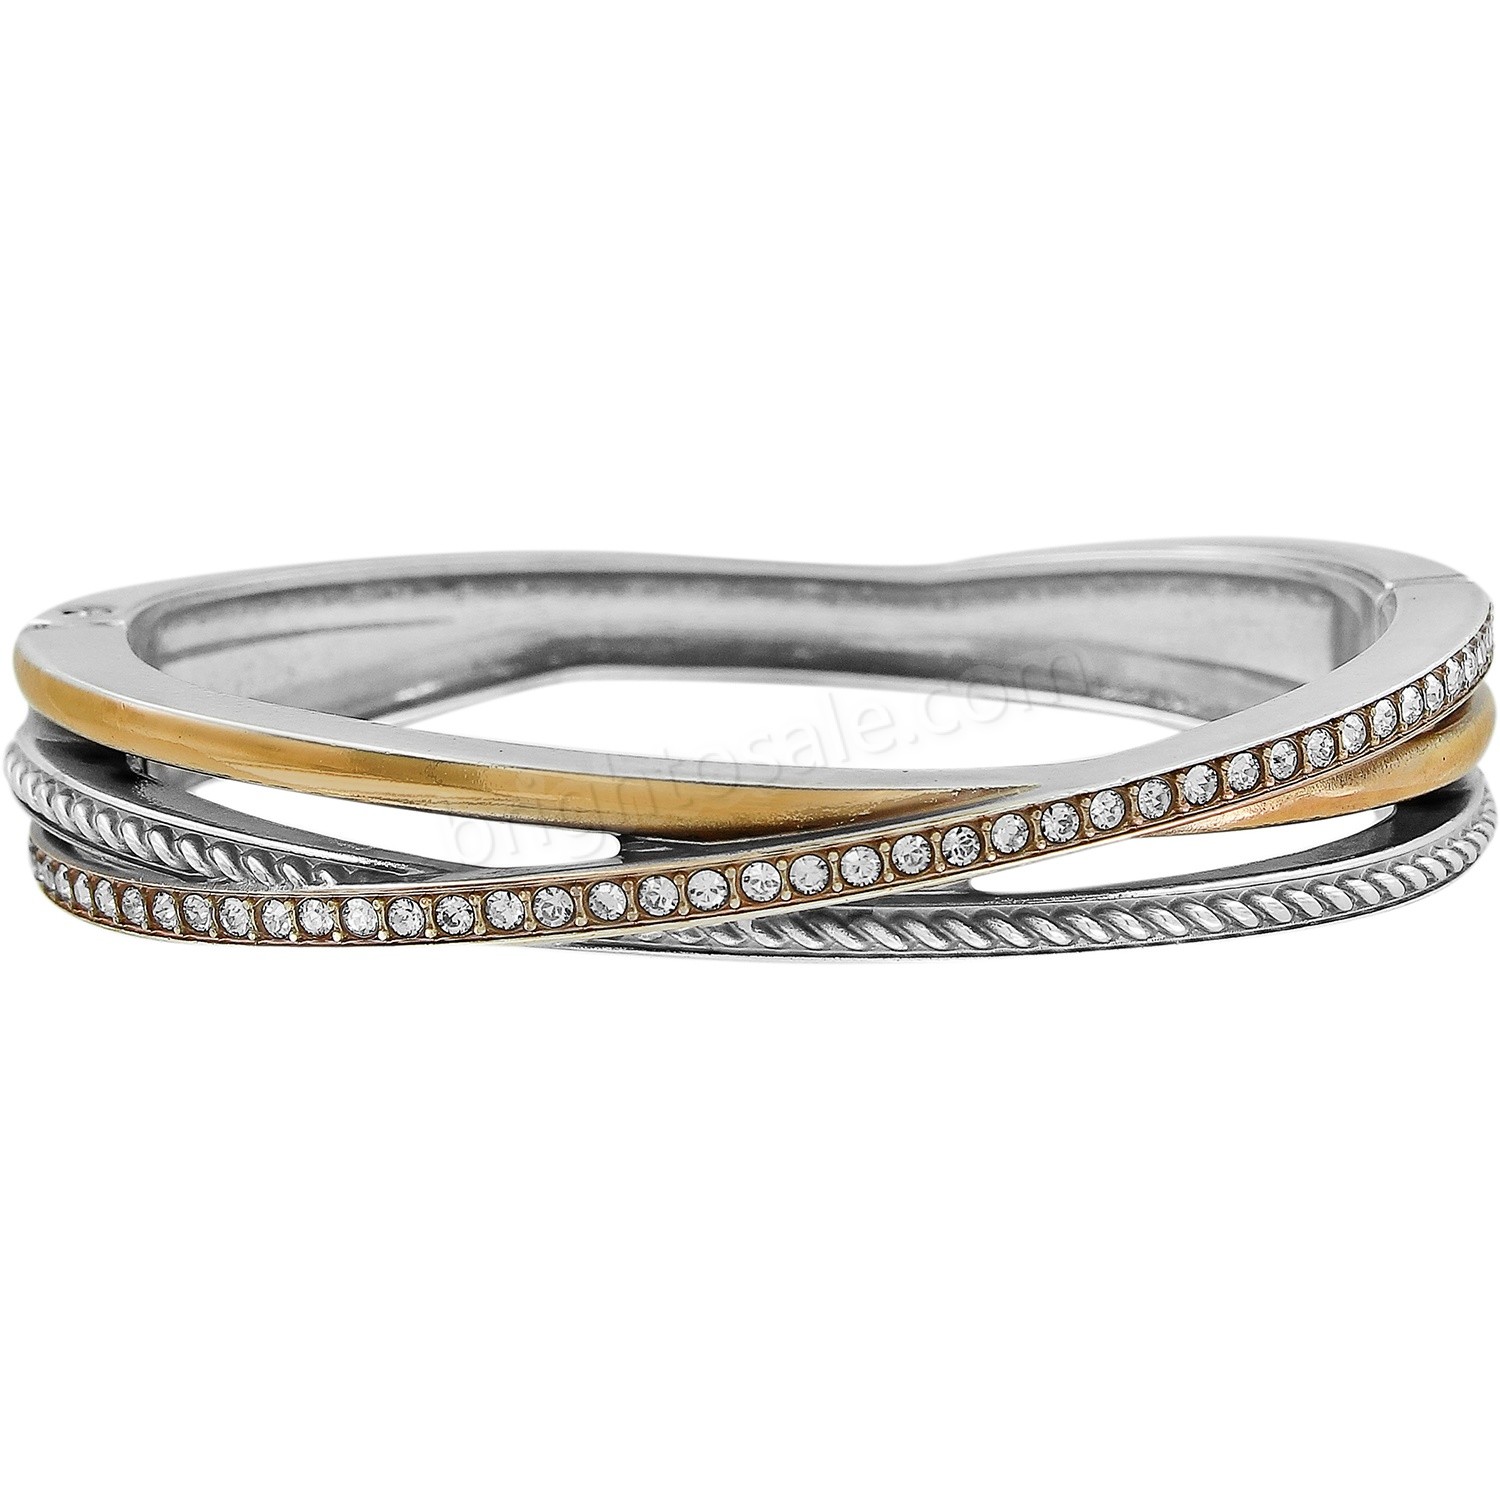 Brighton Collectibles & Online Discount Neptune's Rings Narrow Hinged Bangle - Brighton Collectibles & Online Discount Neptune's Rings Narrow Hinged Bangle